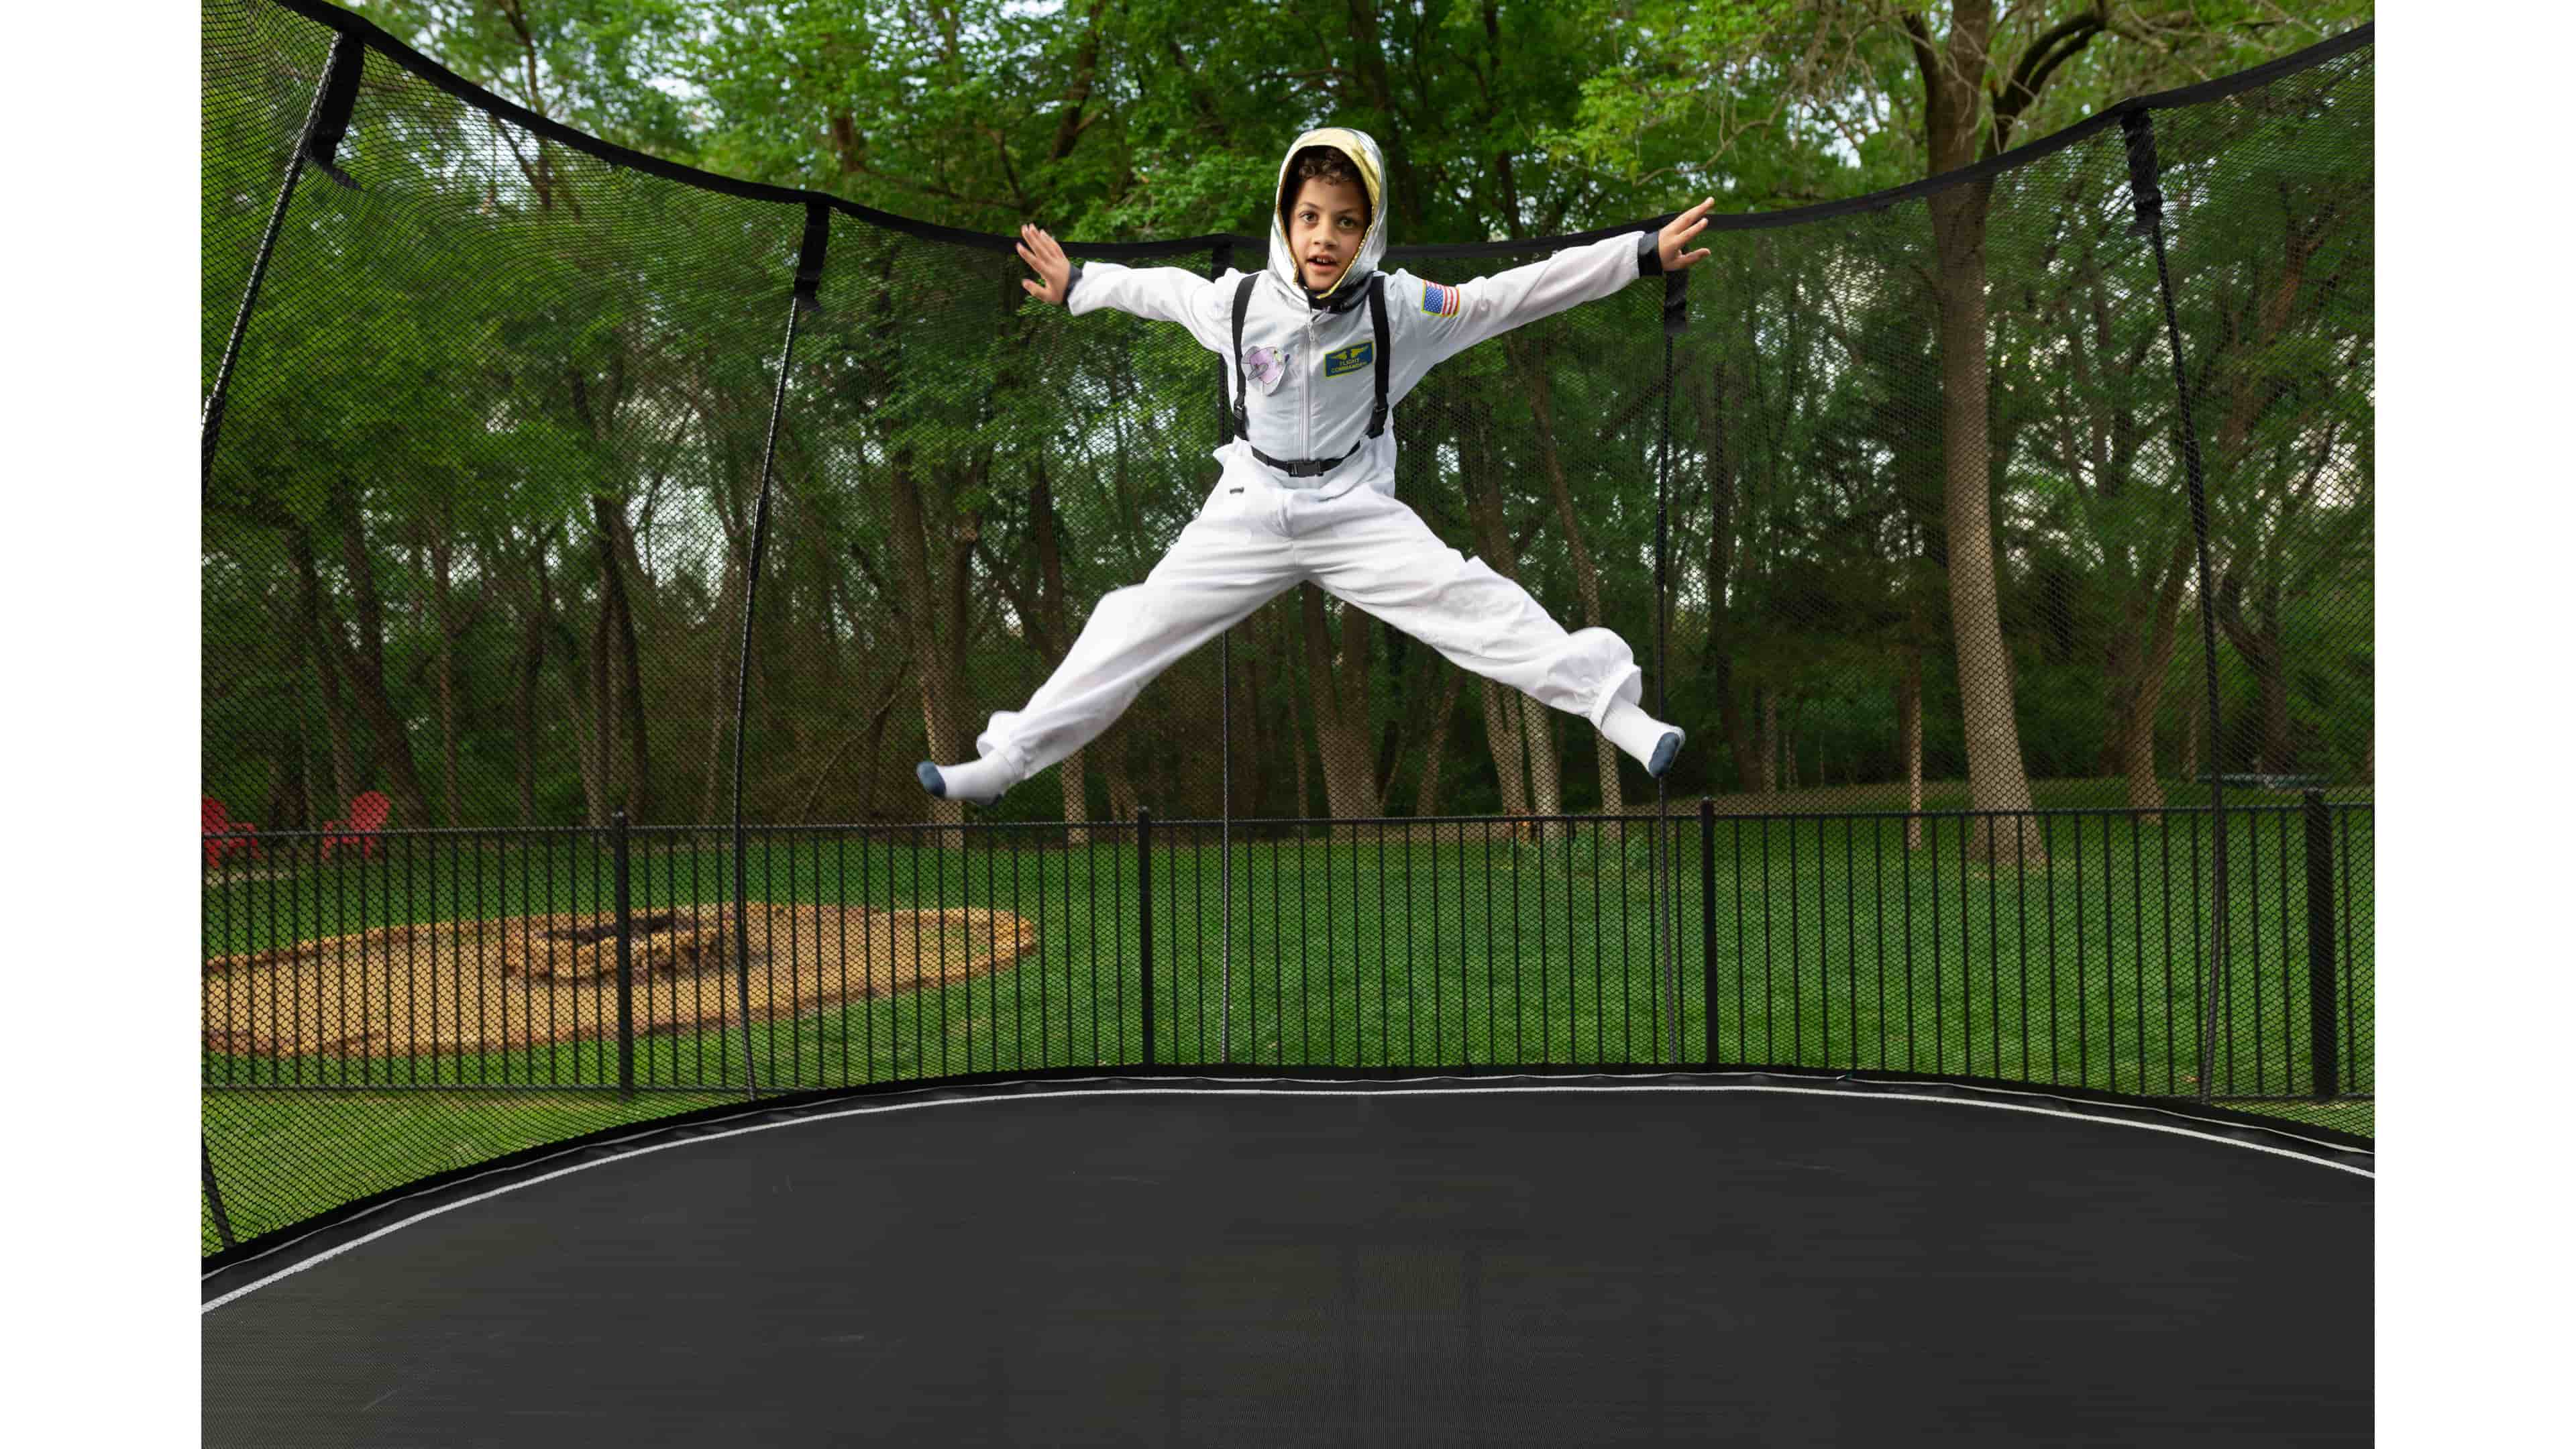 I Exercised With a Rebounder Trampoline: Here's My Review